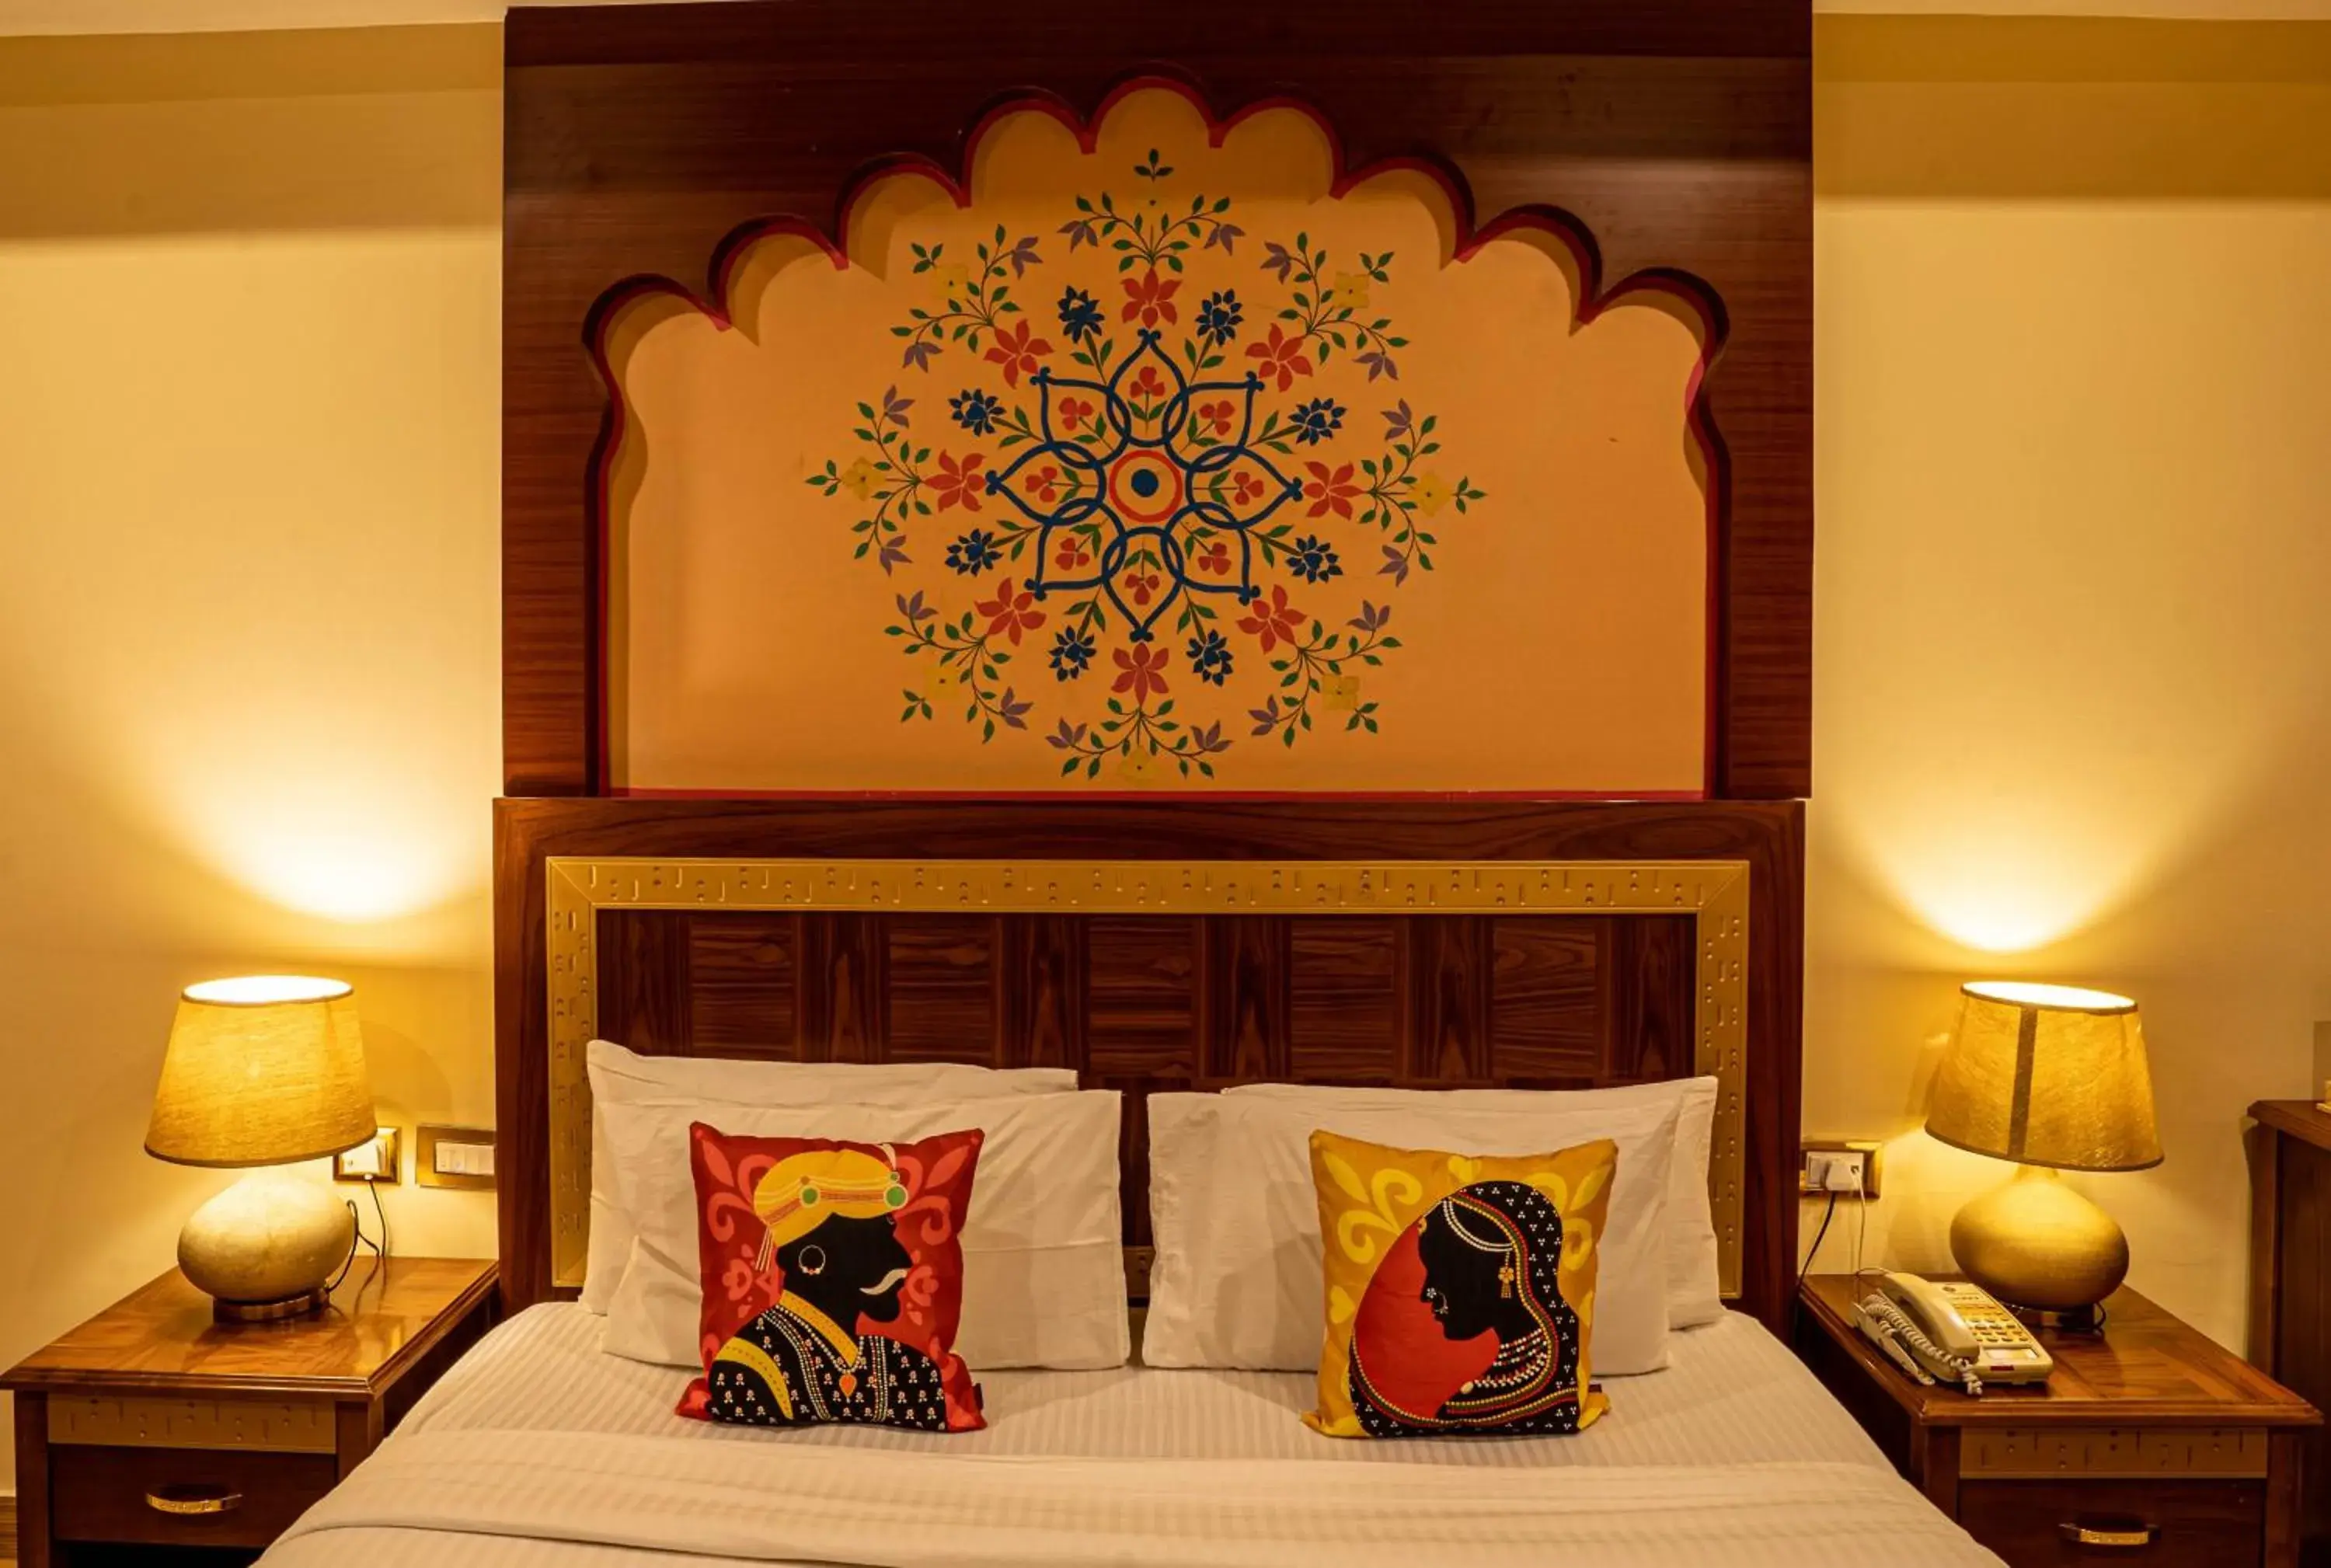 Bed in Chokhi Dhani - The Palace Hotel